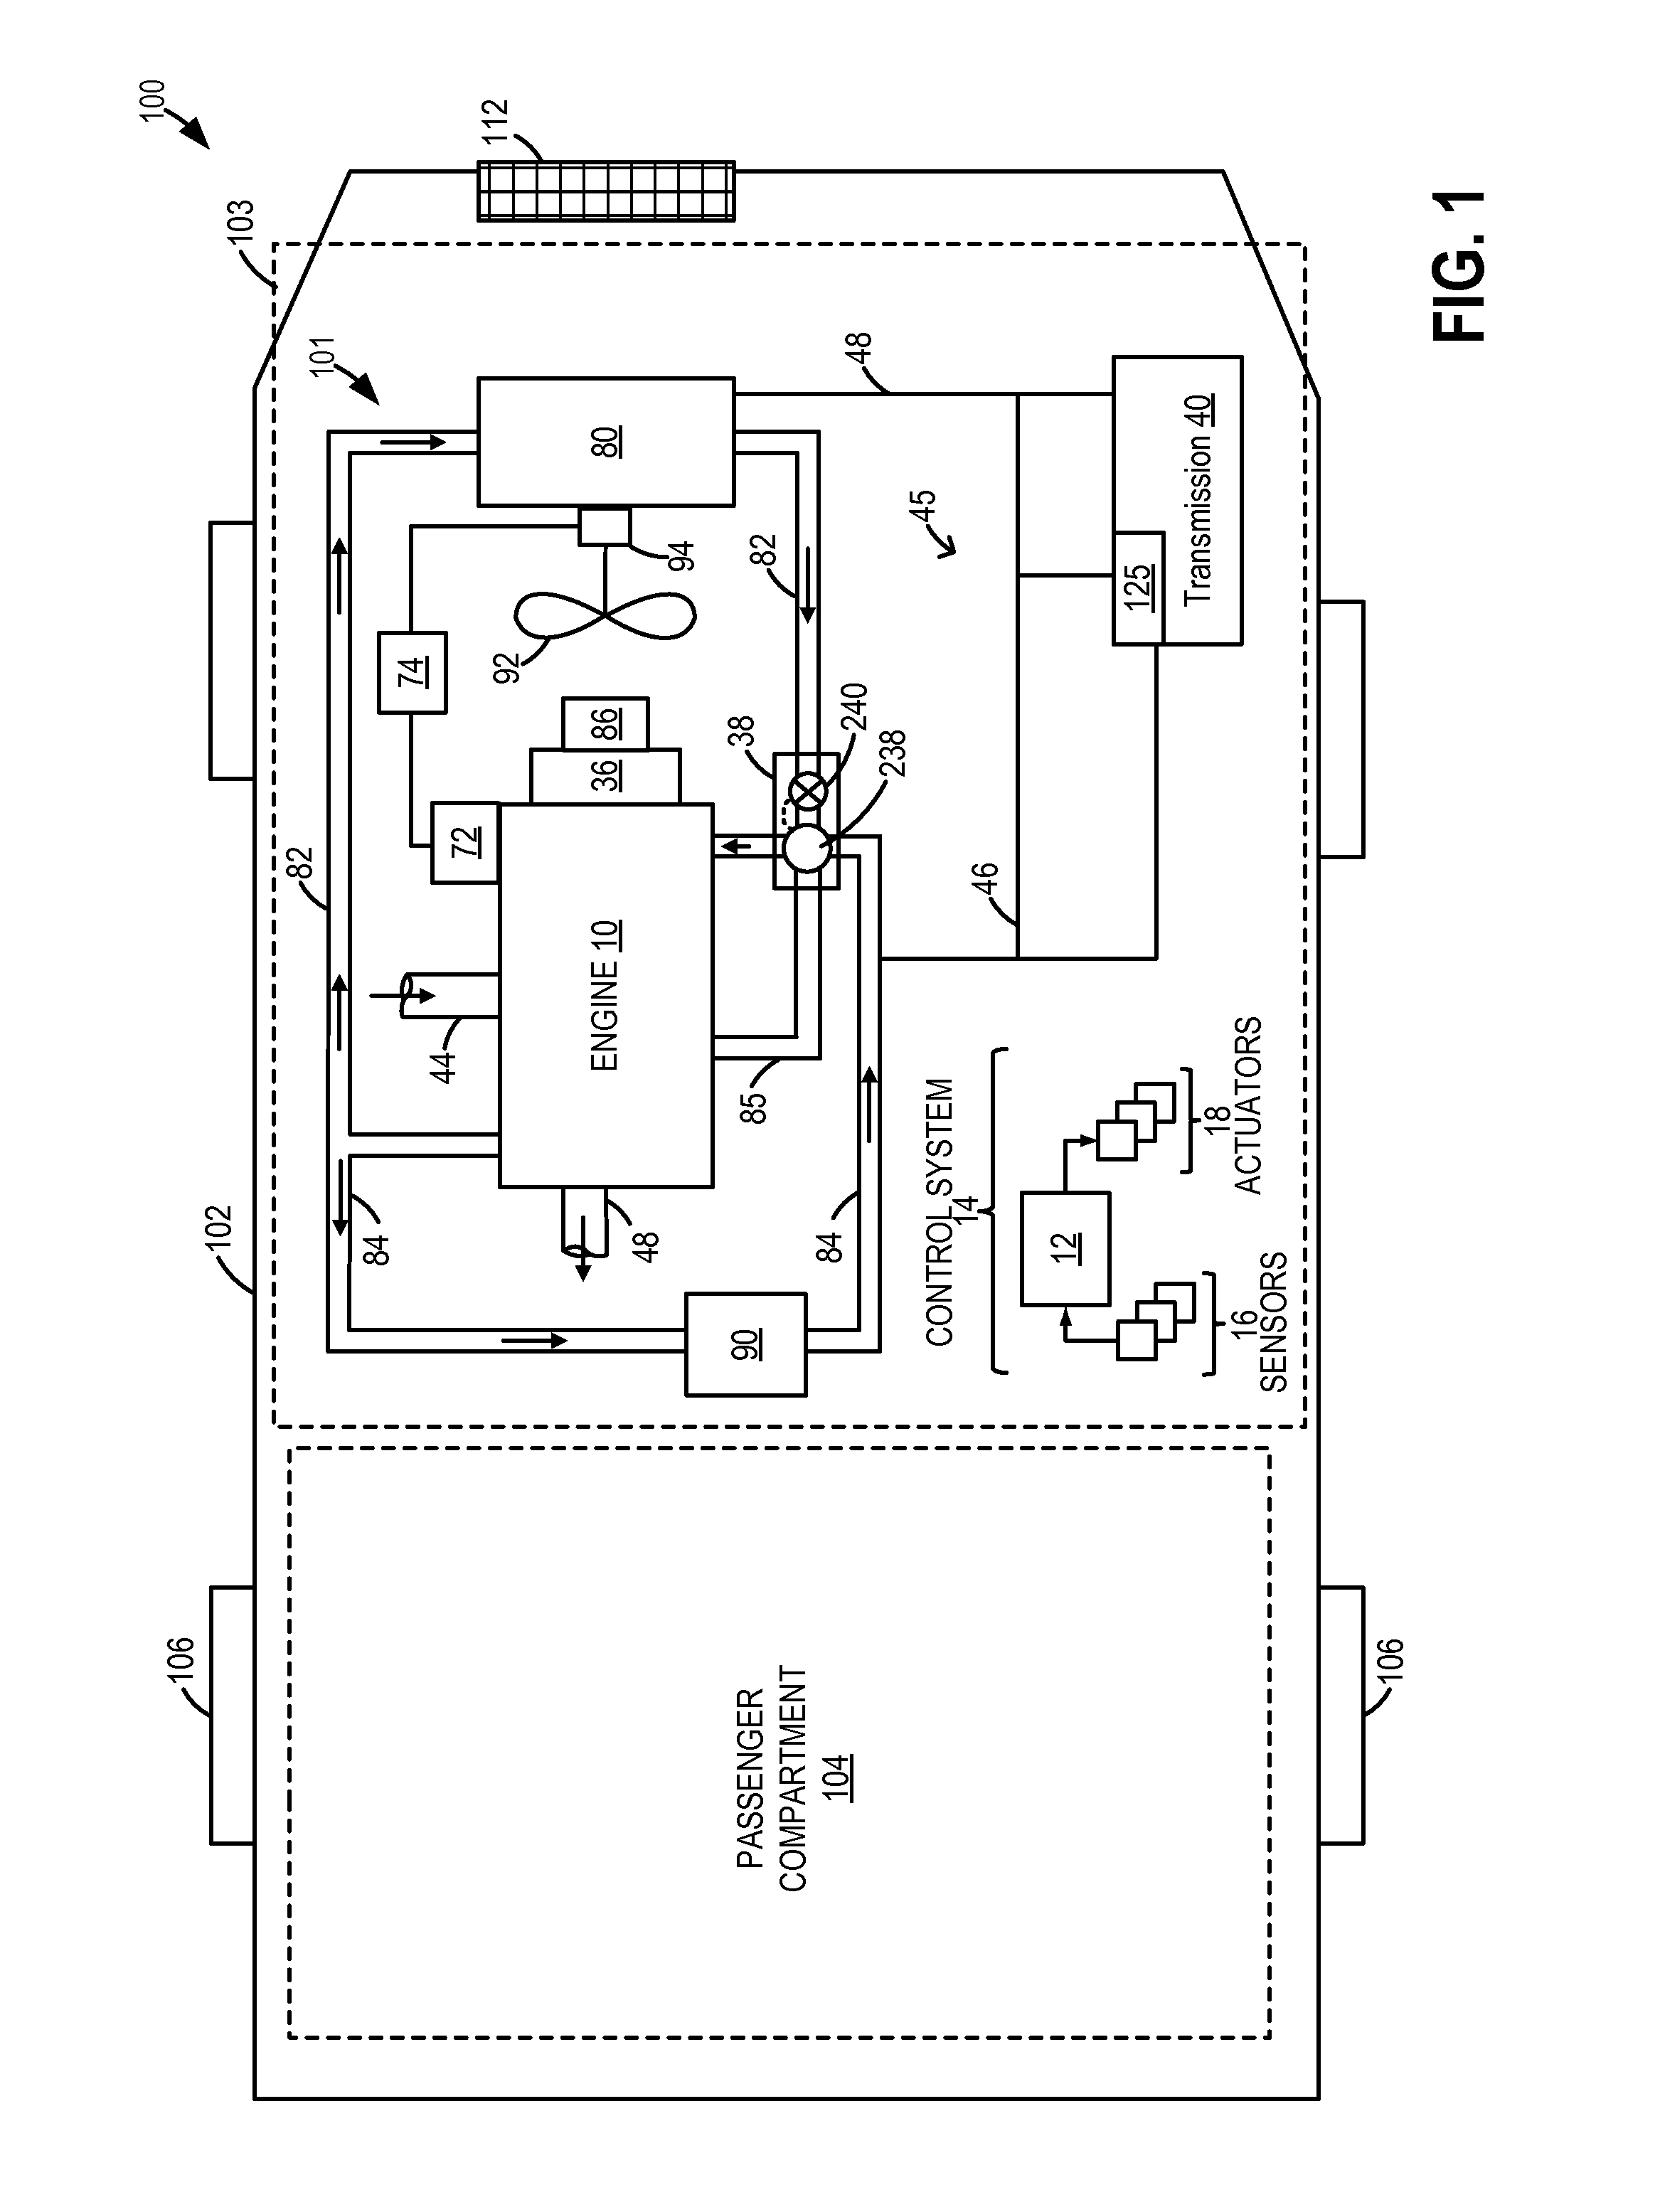 Method and system for engine cooling system control